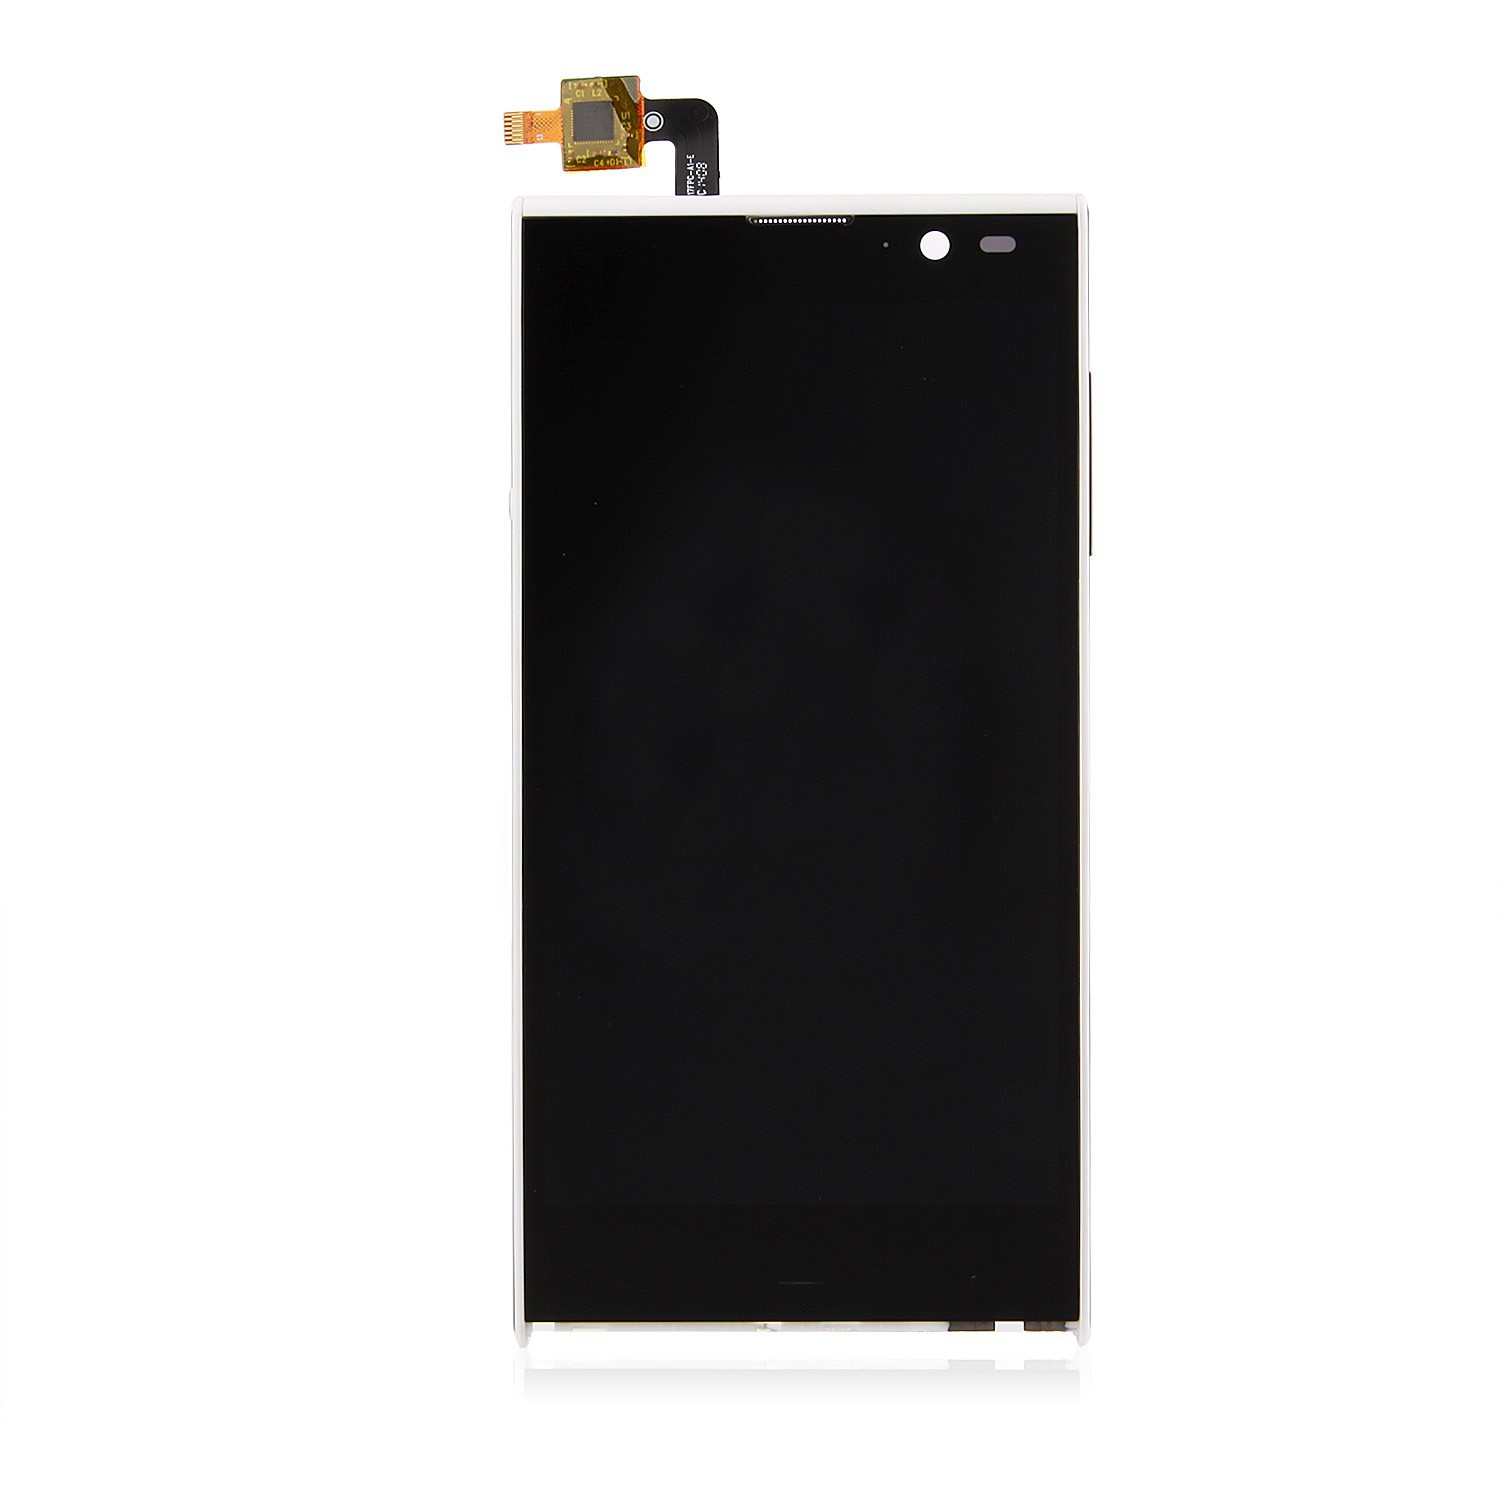 Fly Mobile Display Repair and Replacement In Chennai